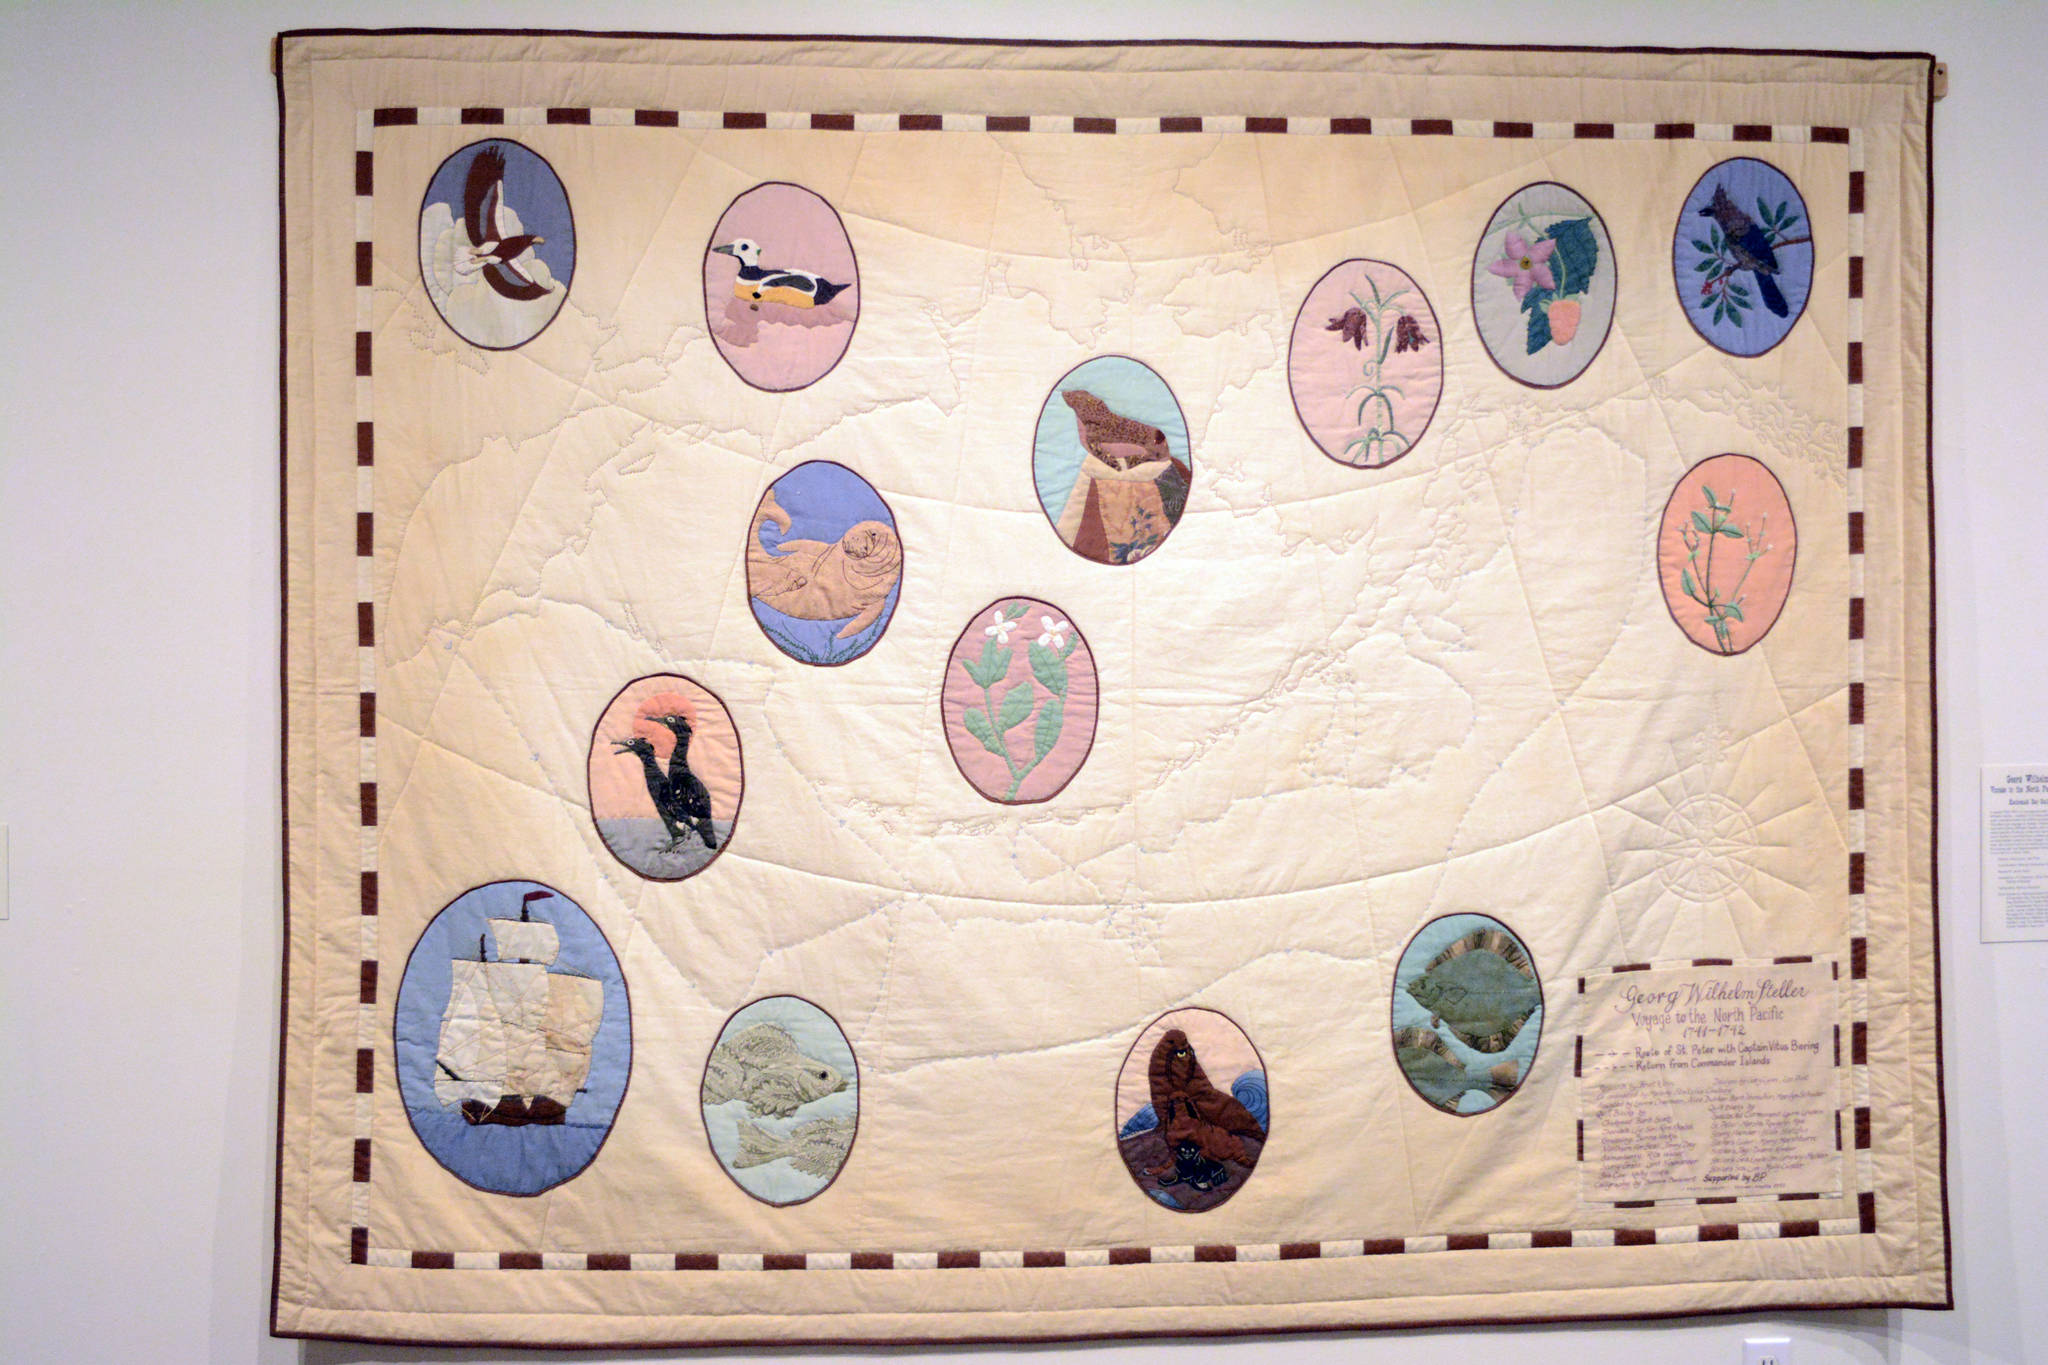 “Georg Wilhelm Steller: Voyage to the North Pacific 1741-42,” by the Kachemak Bay Quilters, done in 1991, commemorates the 250th anniversary of Bering’s voyage to Alaska that included Alaska’s first naturalist. Shown here Tuesday, Aug. 22, 2017, it shows the route of Bering’s voyage and the animals Steller first described. It’s part of the cARTography exhibit at the Pratt Museum, Homer, Alaska. (Photo by Michael Armstrong, Homer News)